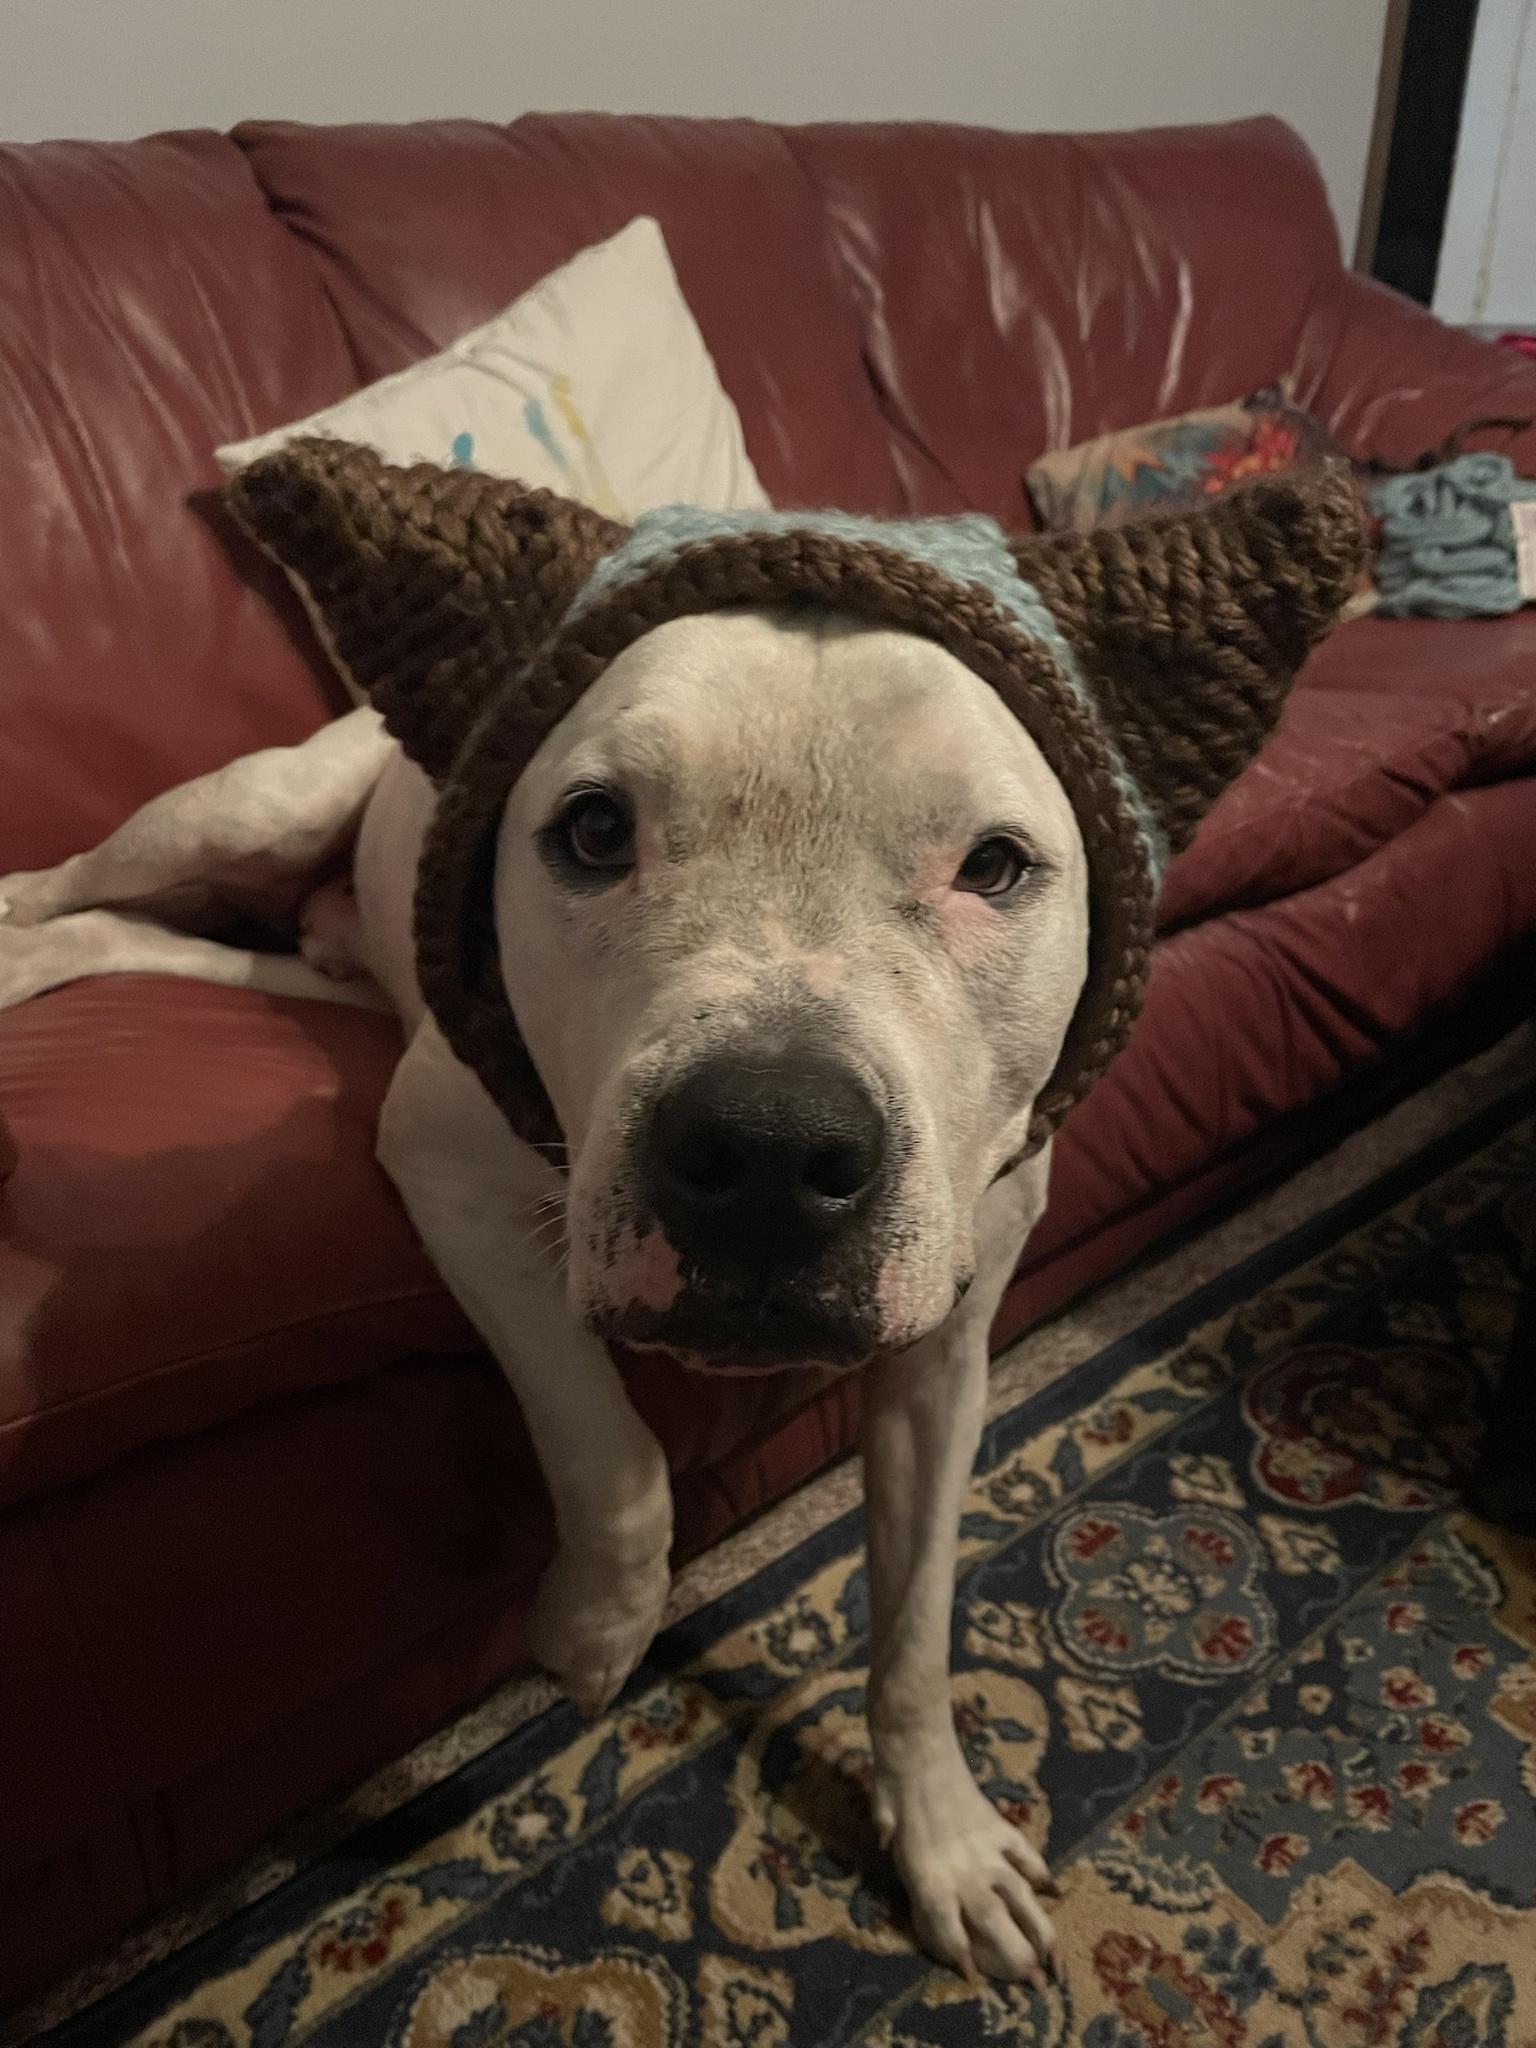 Completed crocheting my dog’s winter hat